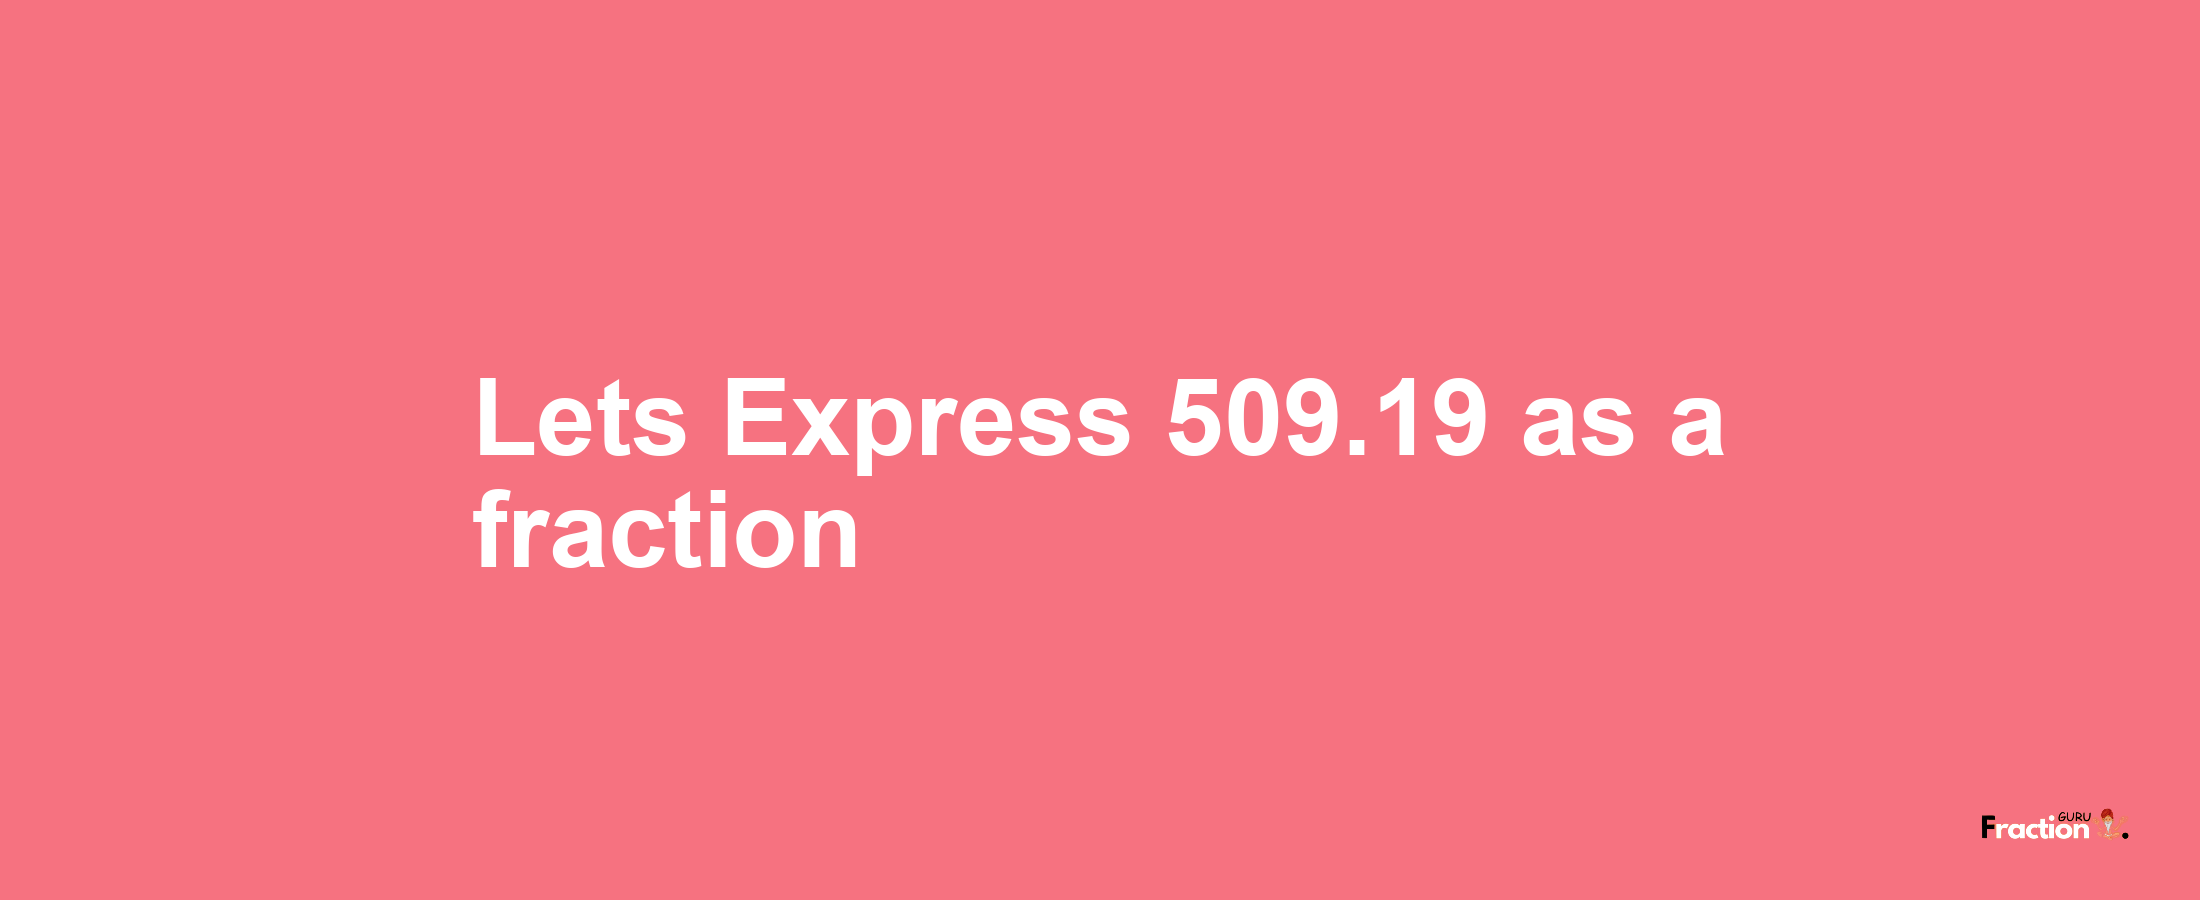 Lets Express 509.19 as afraction